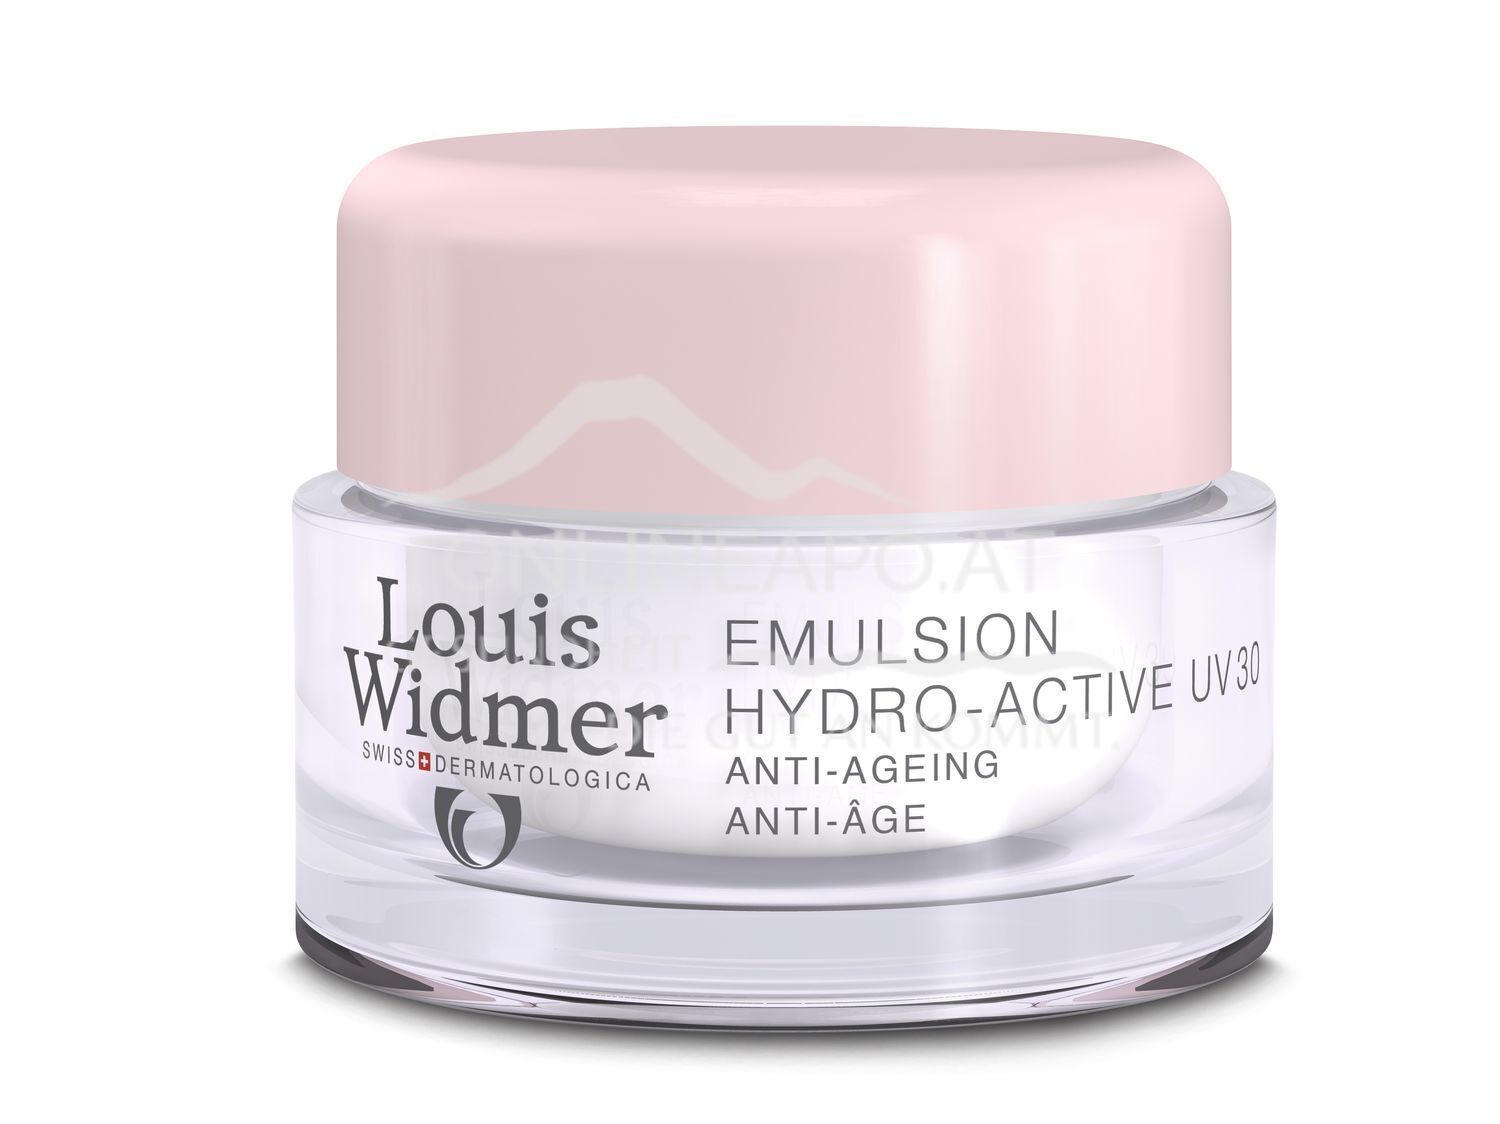 Louis Widmer Tagesemulsion Hydro-Active UV 30